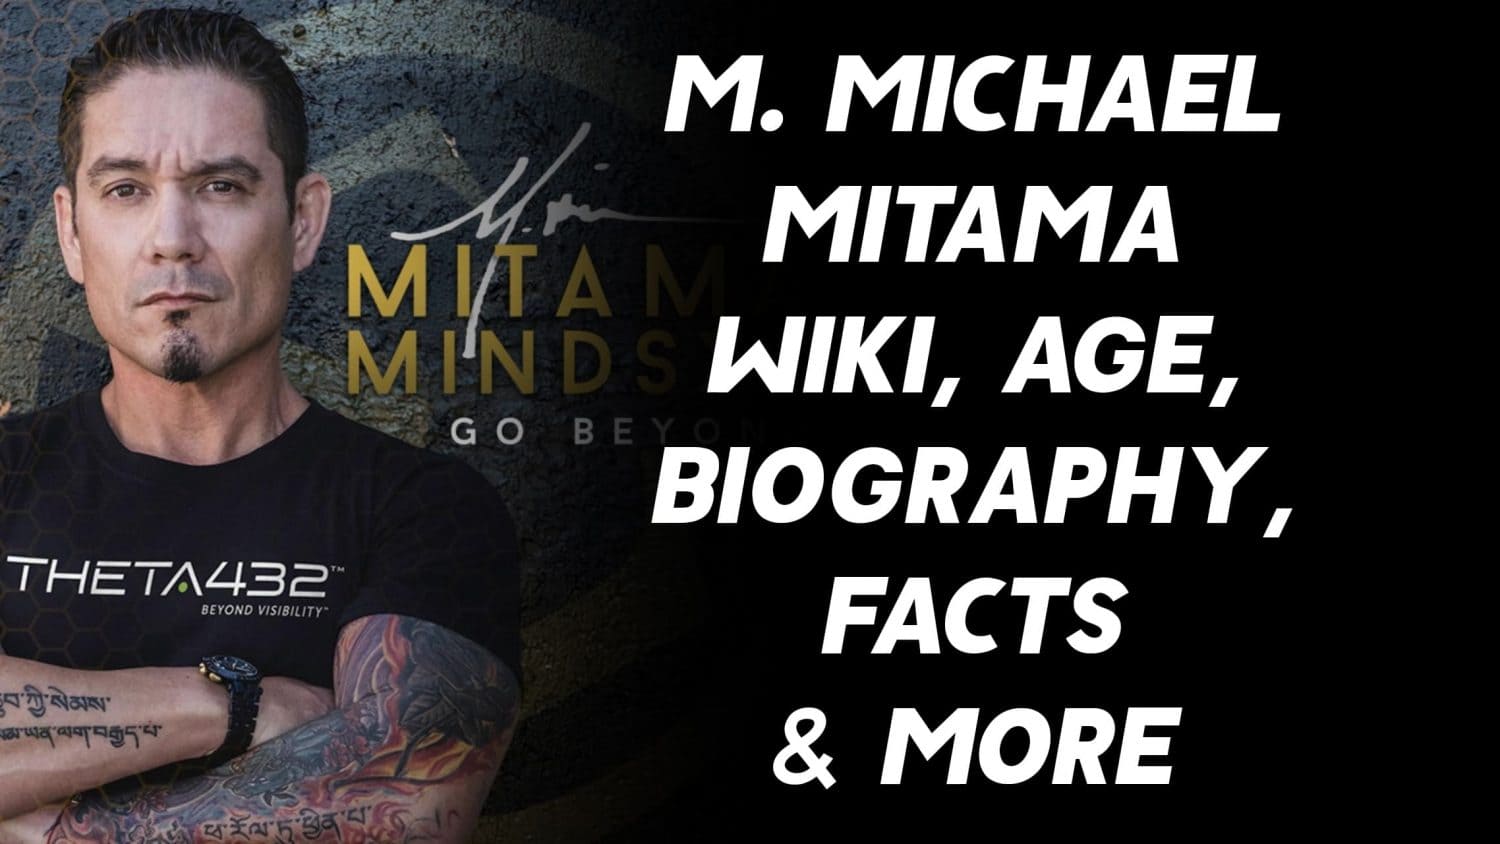 M. Michael Mitama Wiki, Age, Biography, Facts & More 1